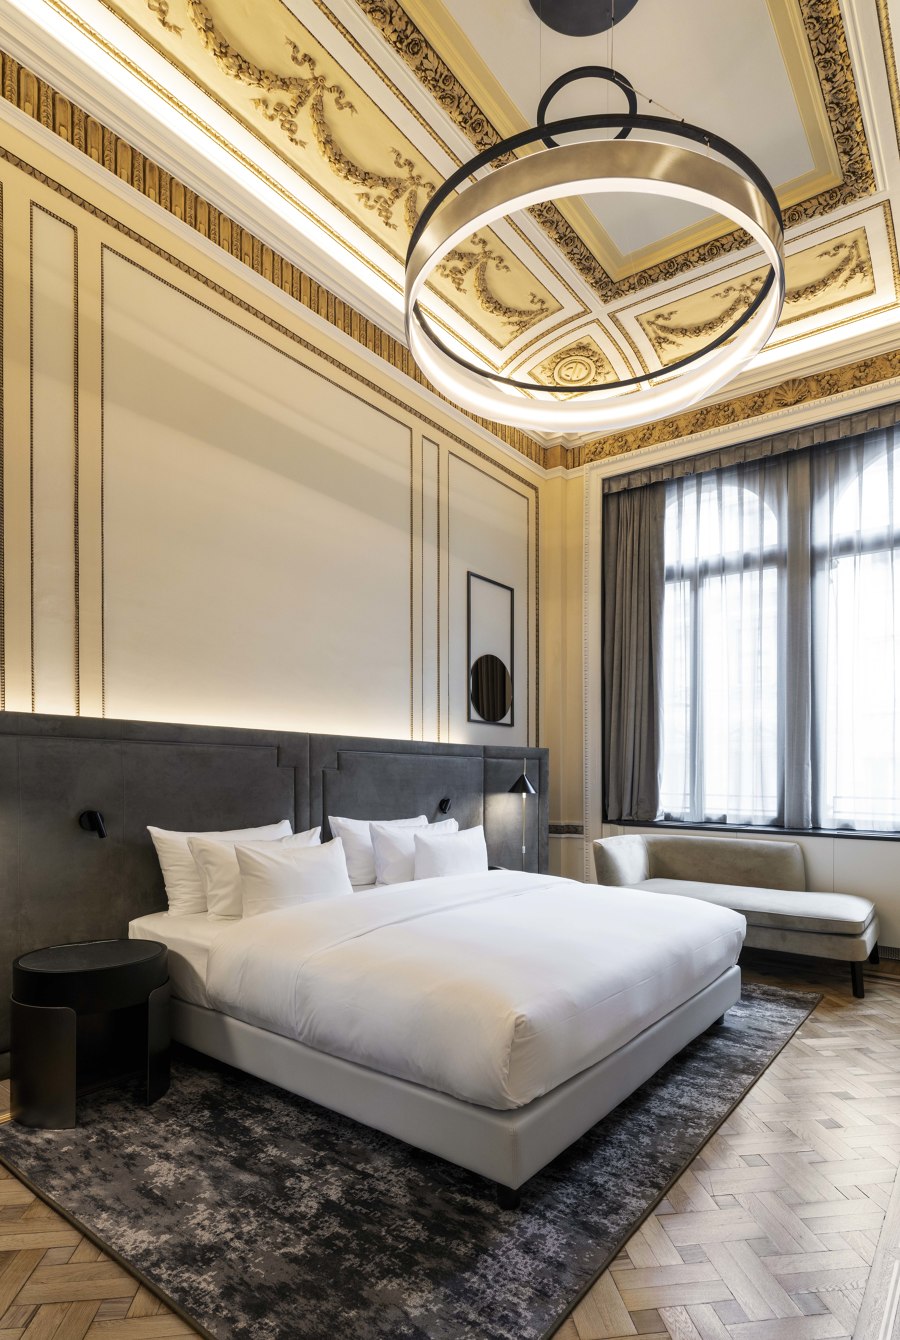 Radisson Collection Hotel, Palazzo Touring Club Milan by Marco Piva | Hotel interiors